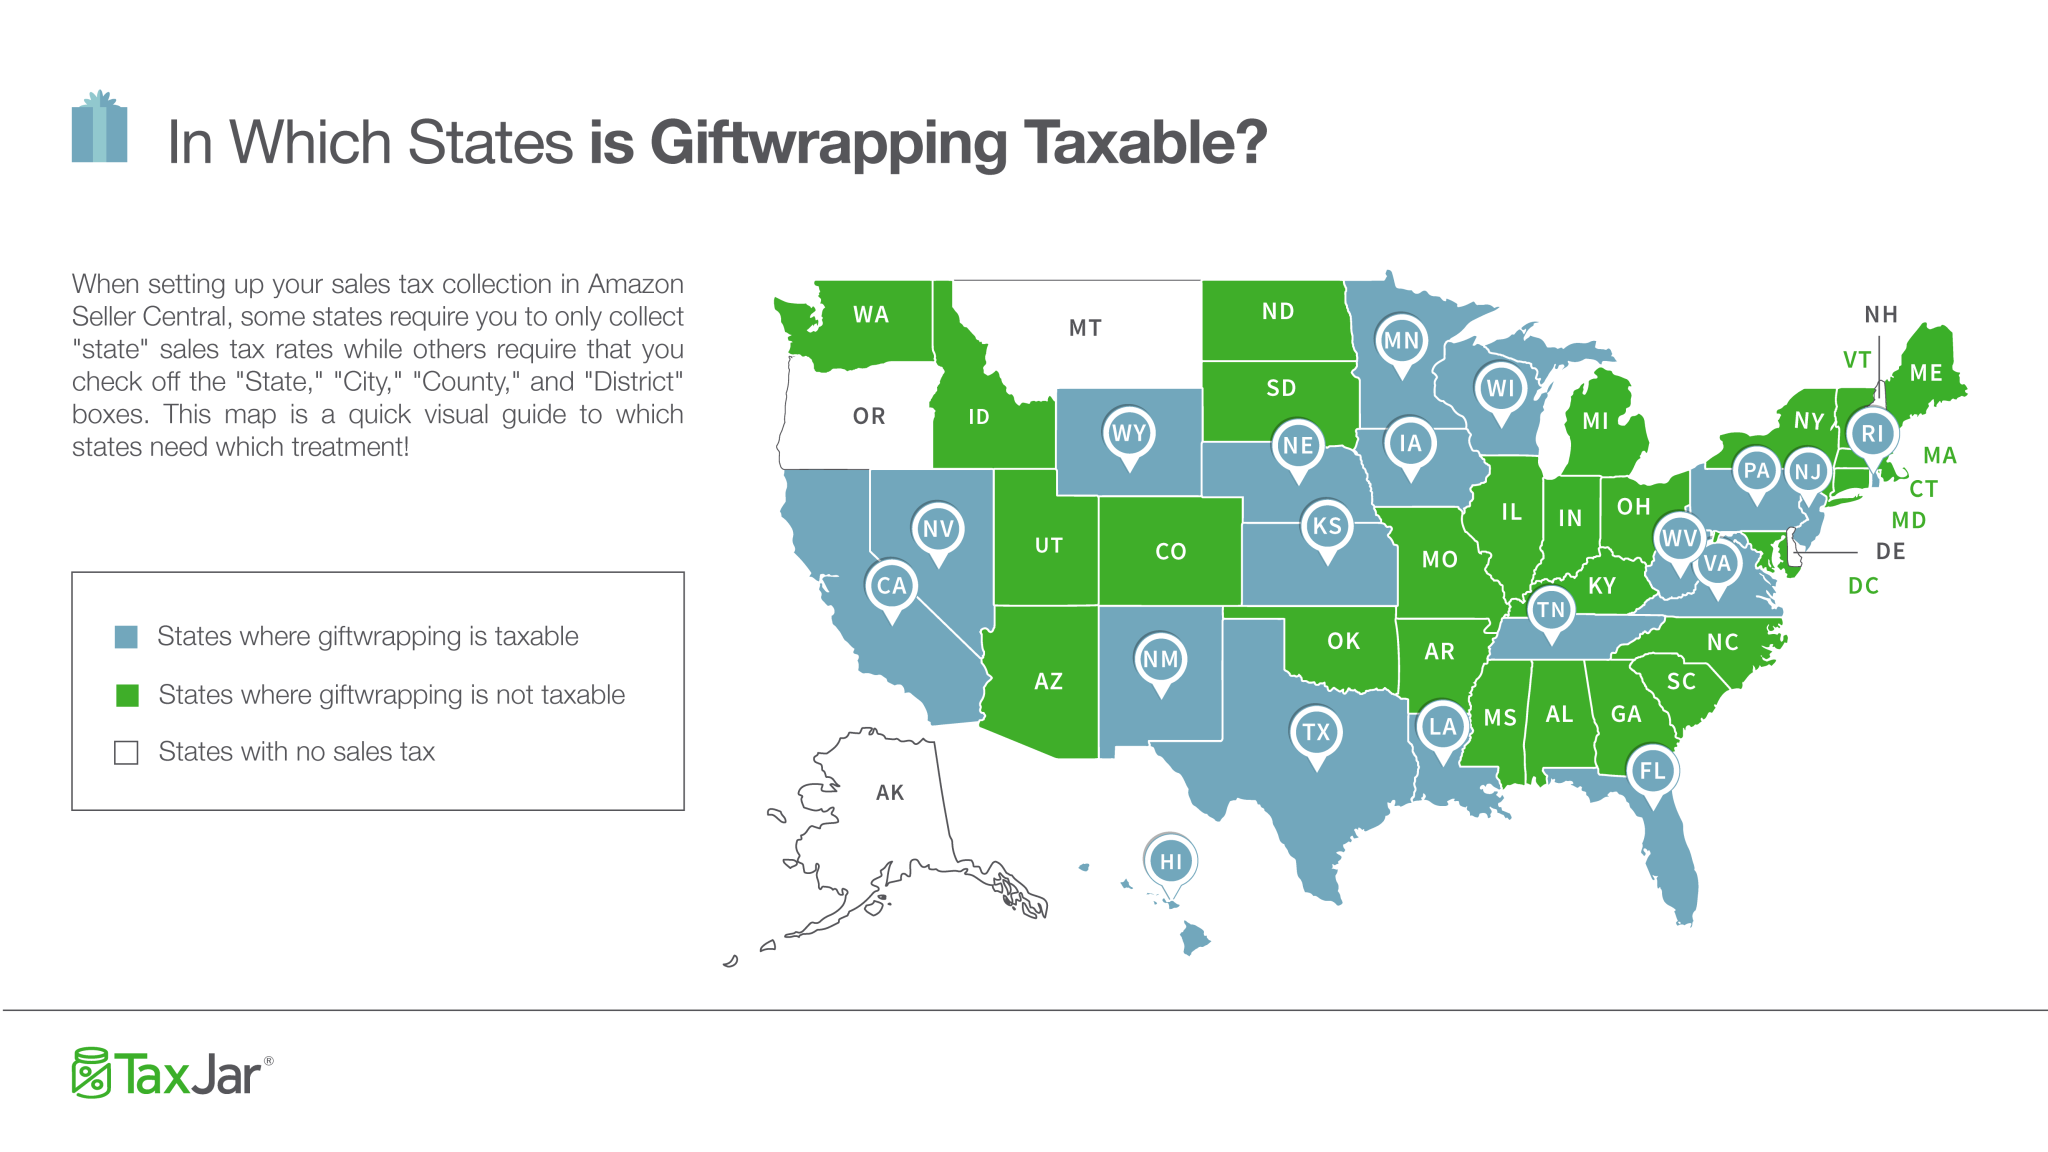 Sales Tax by State: In Which States is Gift-Wrapping Taxable?